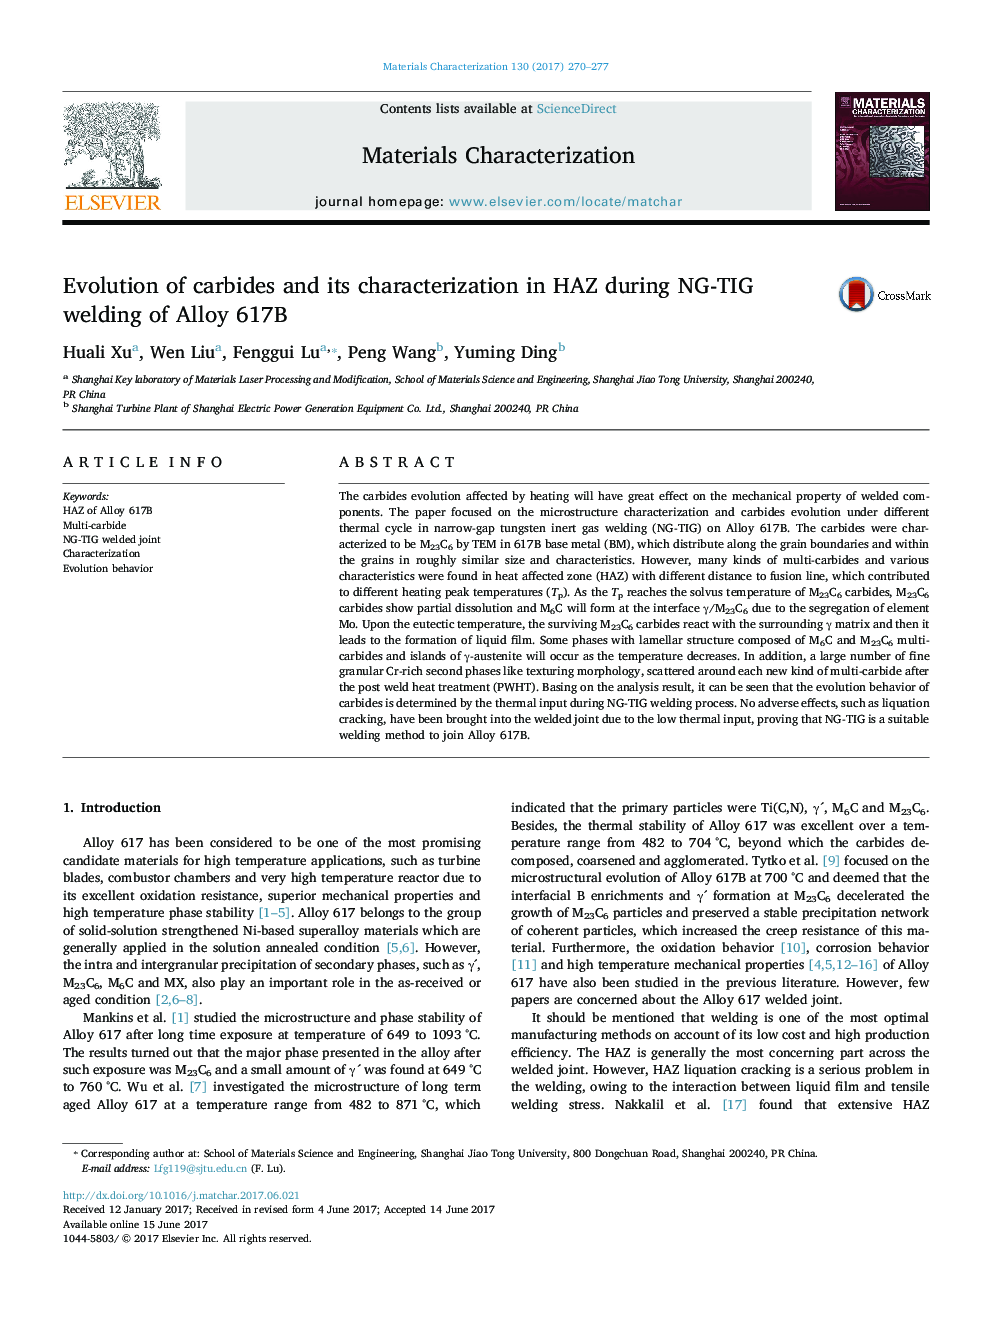 Evolution of carbides and its characterization in HAZ during NG-TIG welding of Alloy 617B